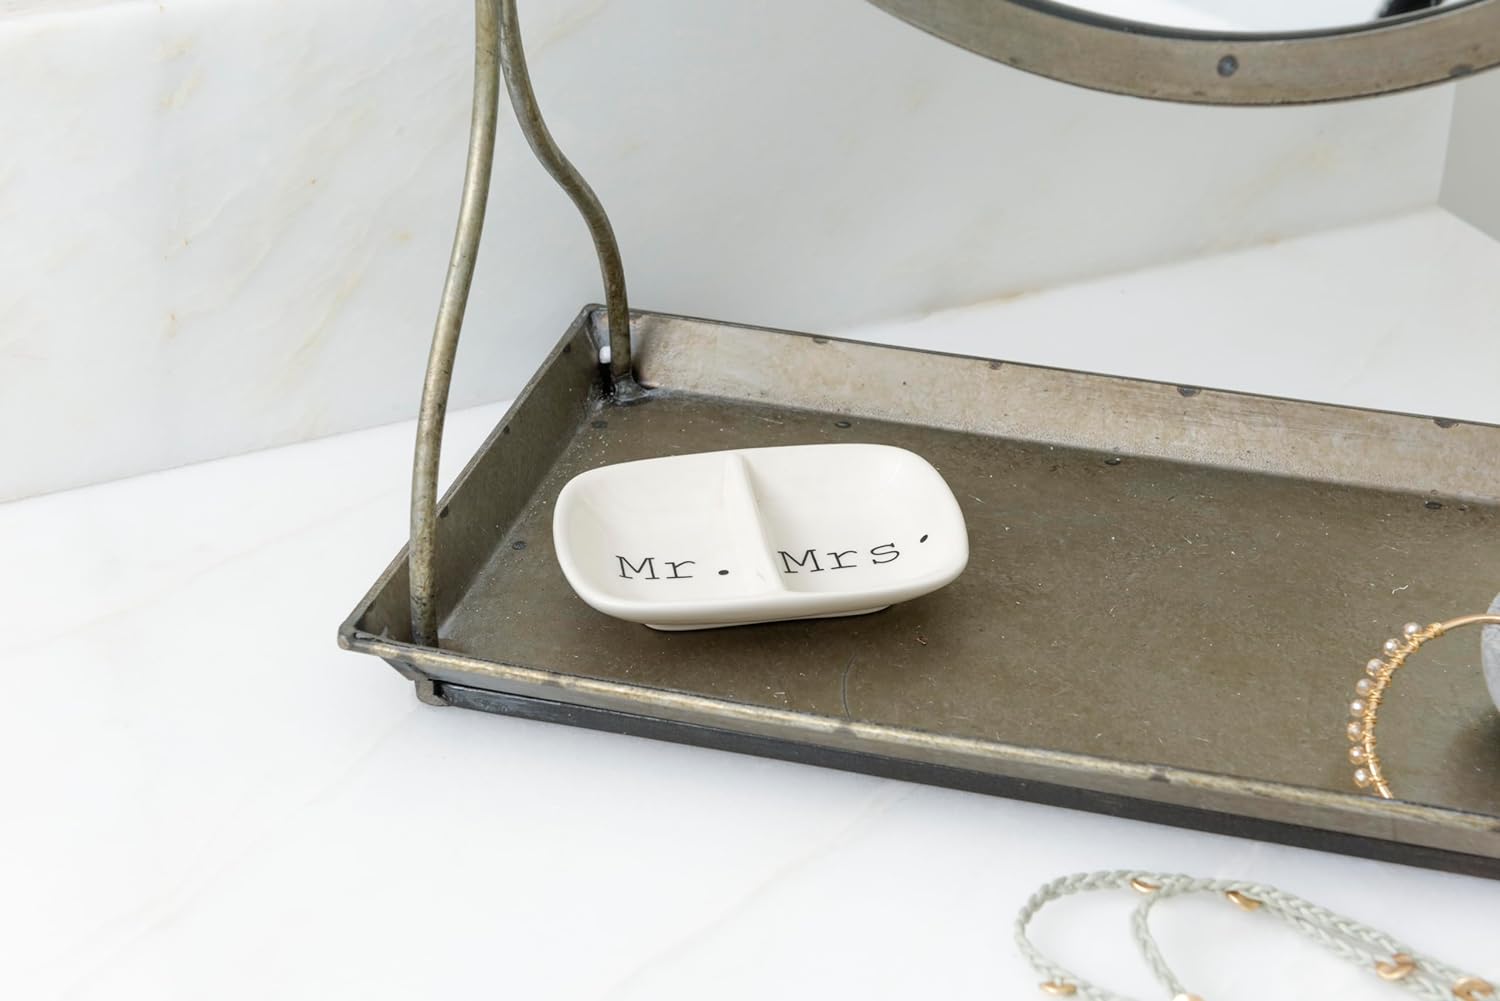 Creative Co-Op Ceramic Mr. & Mrs. Divided Ring Dish - image 3 of 7